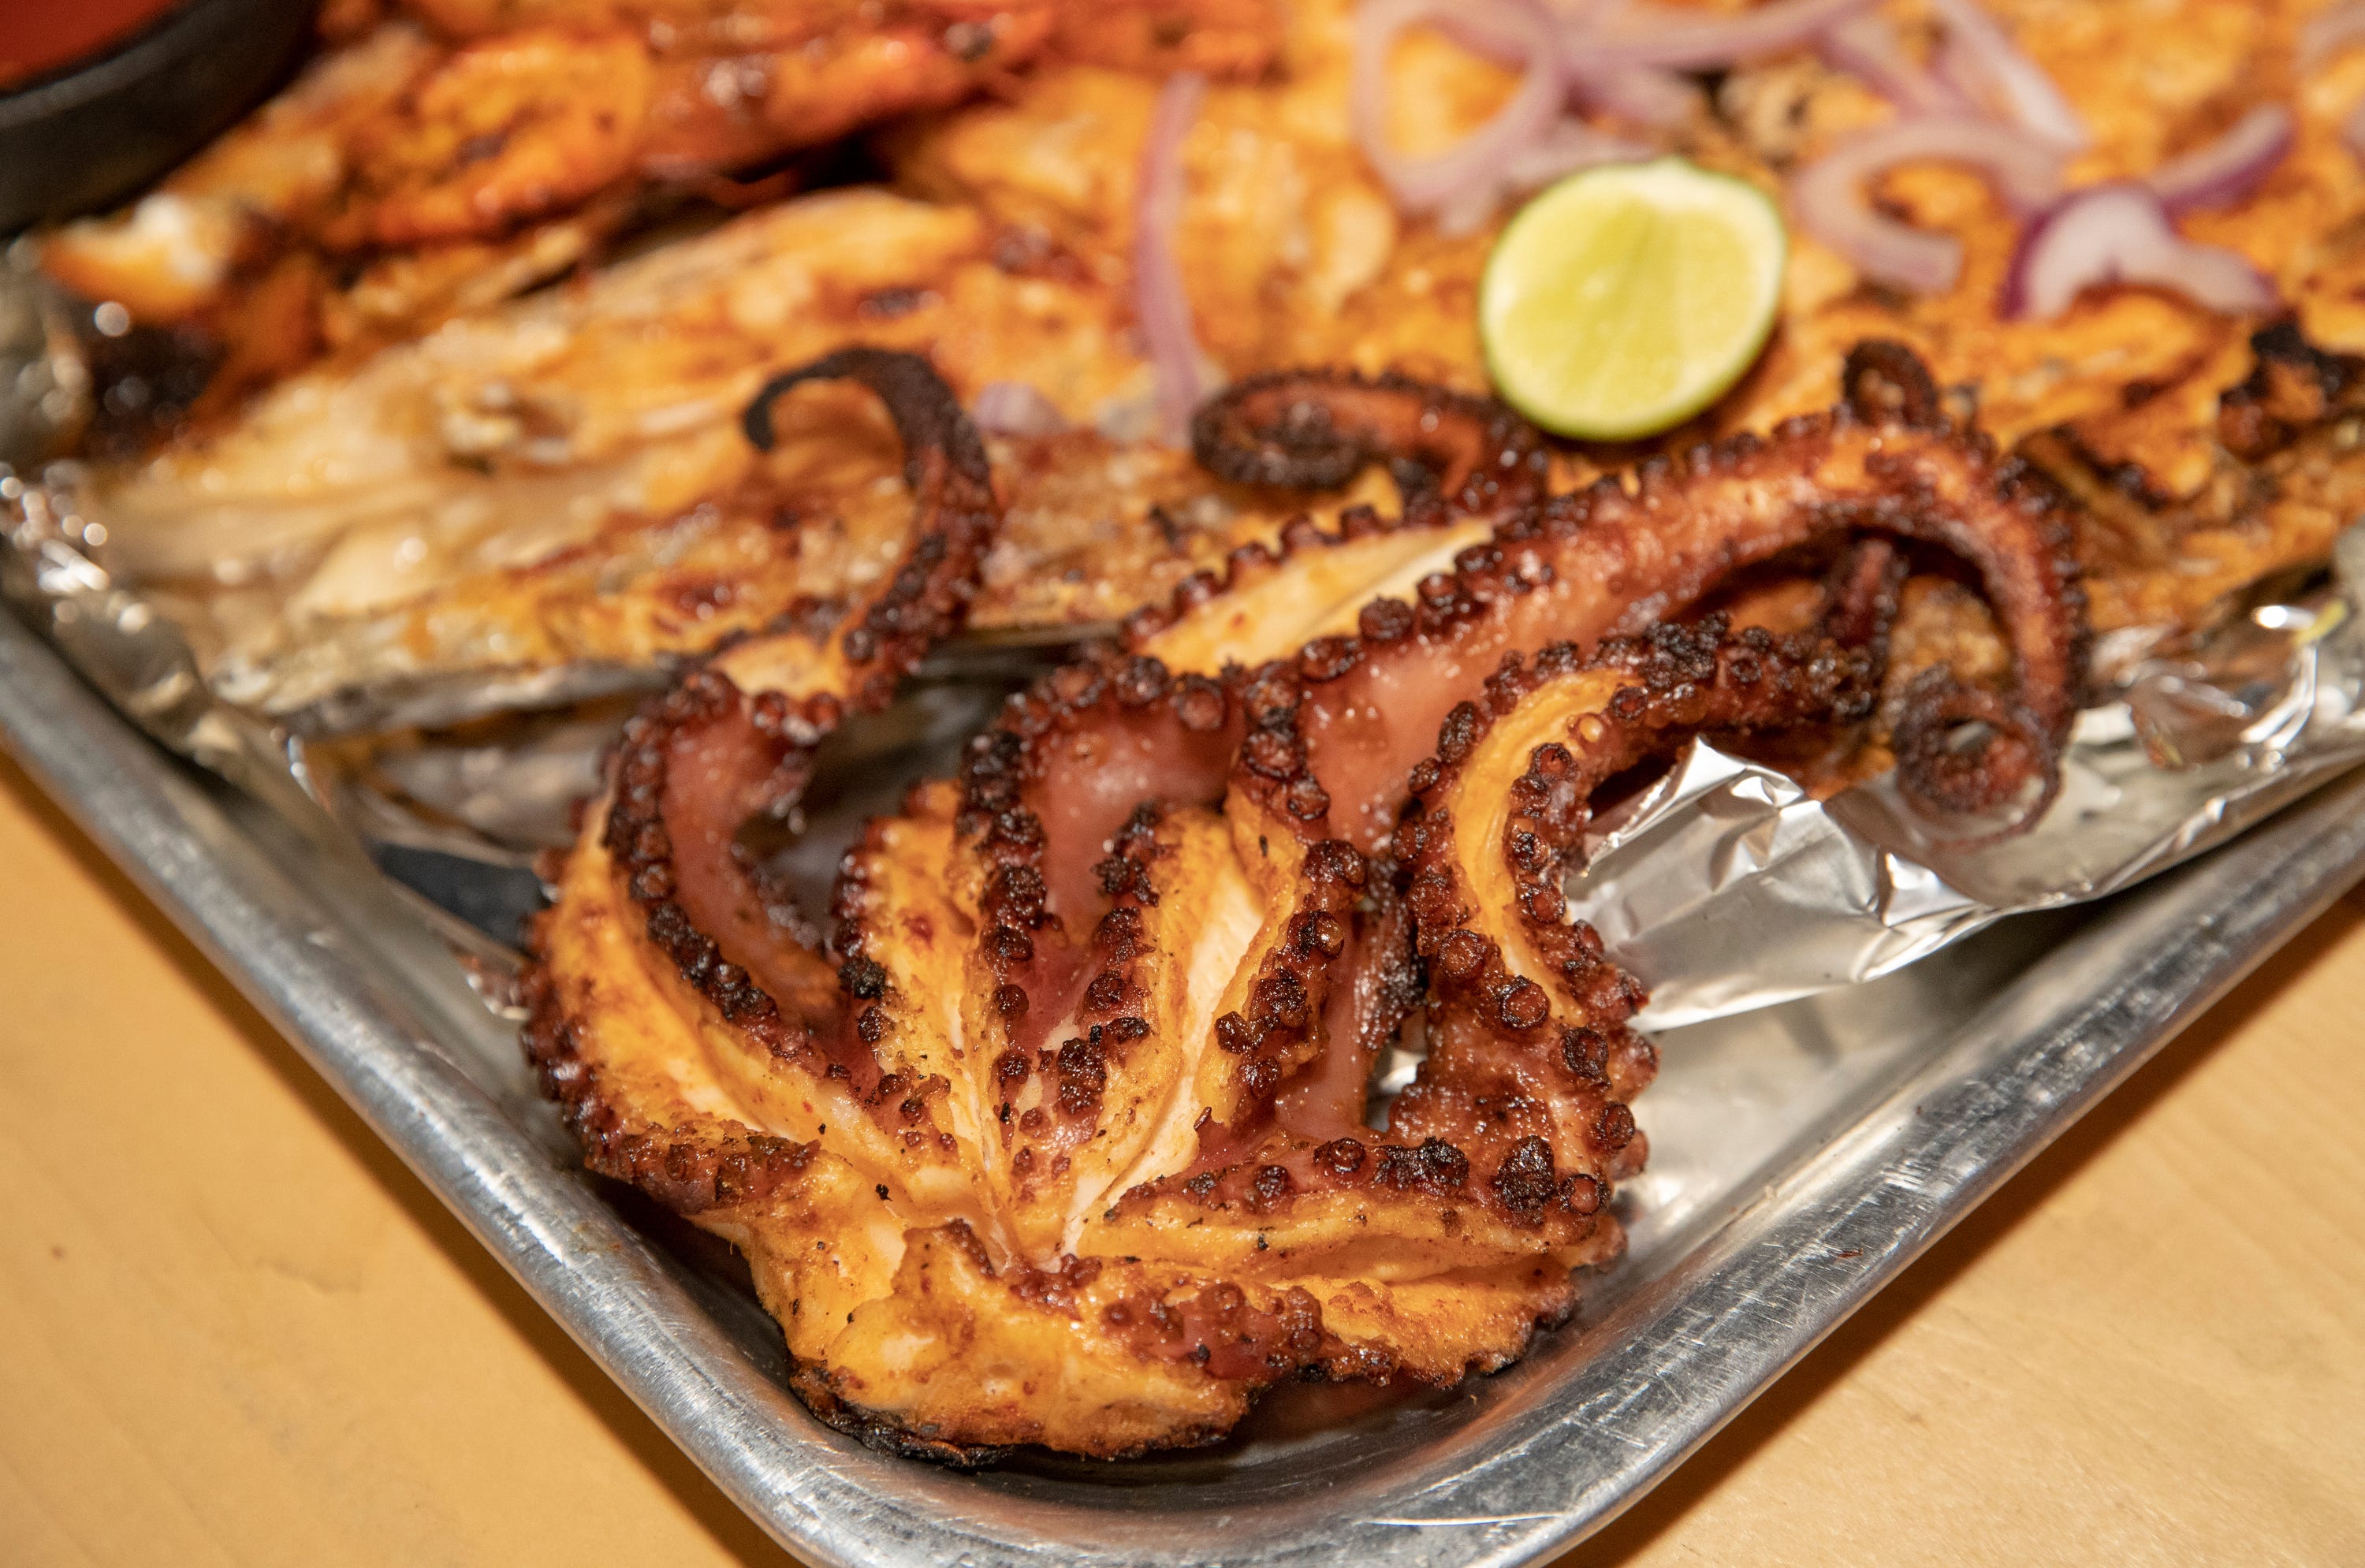 Mariscos del Valle owner Jesus "Chuy" Ruiz Navarro sells grilled octopus from his home business in Coachella, Calif., on Friday, November 13, 2020.